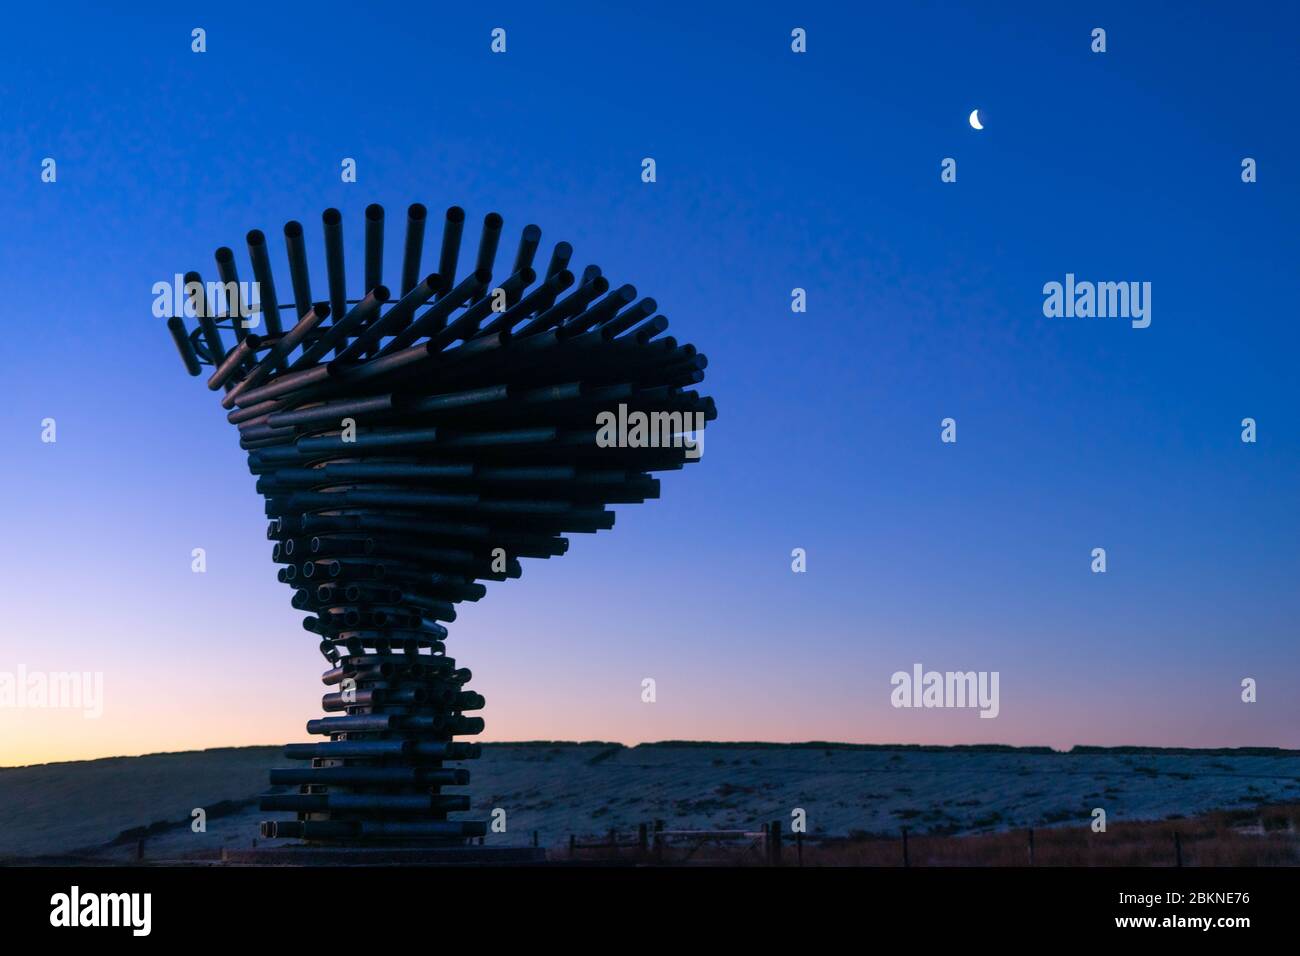 Sunrise at the Singing Ringing Tree in Burnley, Lancashire.  This was taken on a very cold Frosty winter morning. Stock Photo